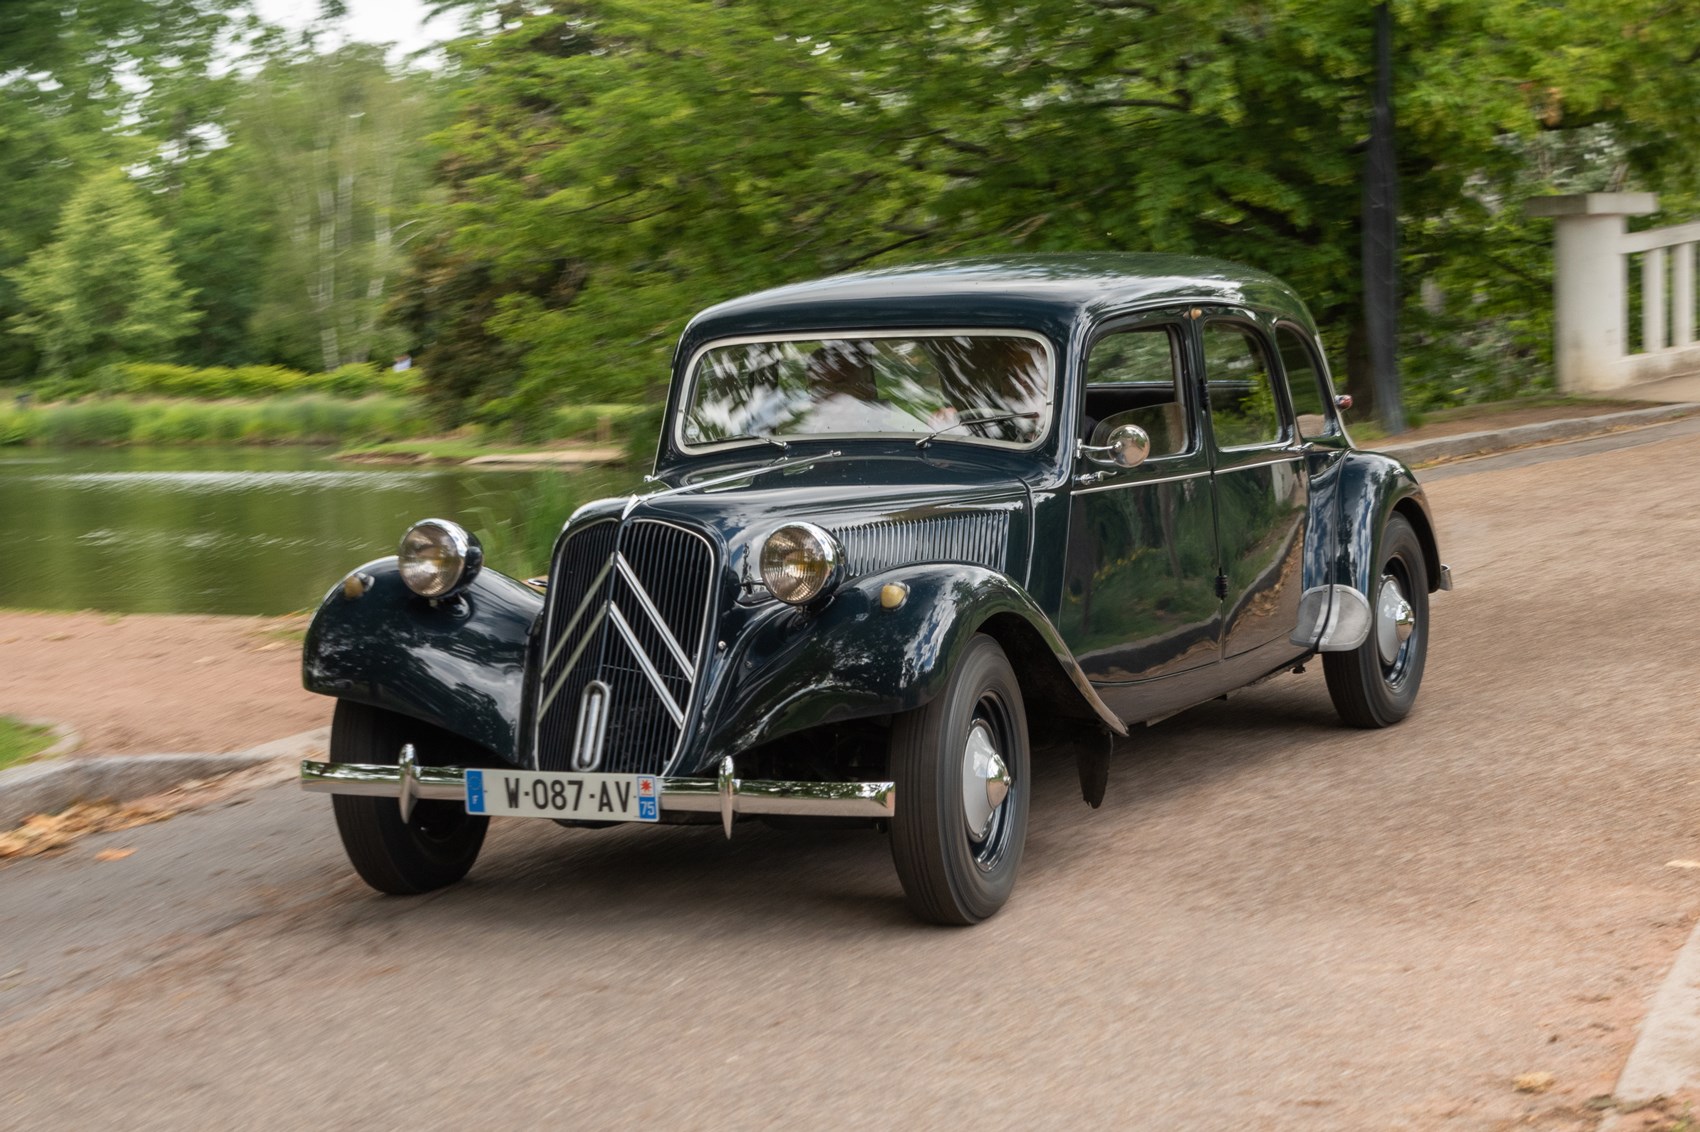 https://car-images.bauersecure.com/pagefiles/88926/1752x1168/tractionavant_01.jpg?mode=max&quality=90&scale=down